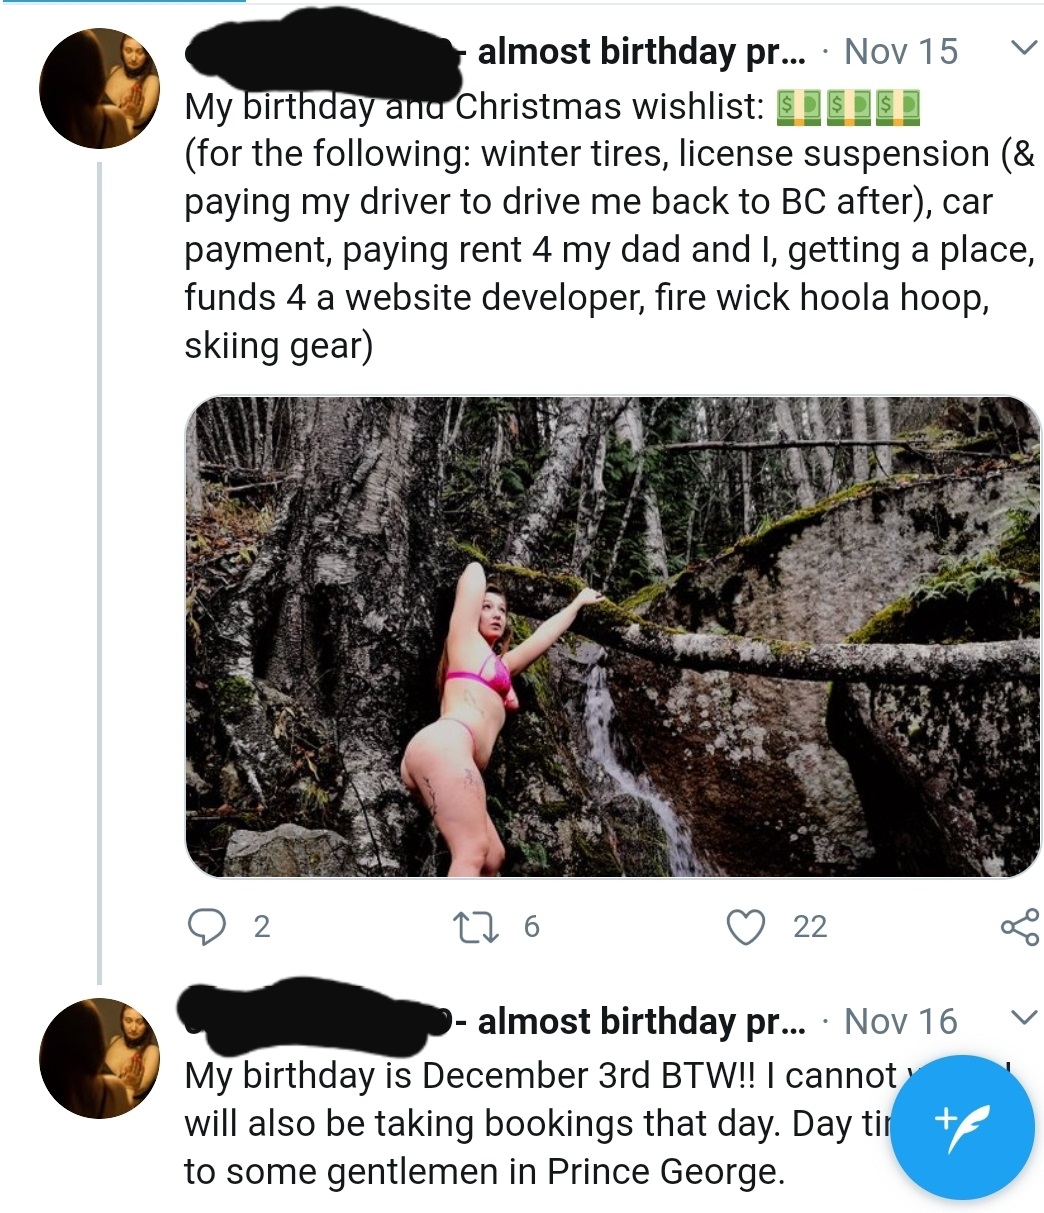 tree - almost birthday pr... Nov 15 My birthday and Christmas wishlist Sredst for the ing winter tires, license suspension & paying my driver to drive me back to Bc after, car payment, paying rent 4 my dad and I, getting a place, funds 4 a website develop